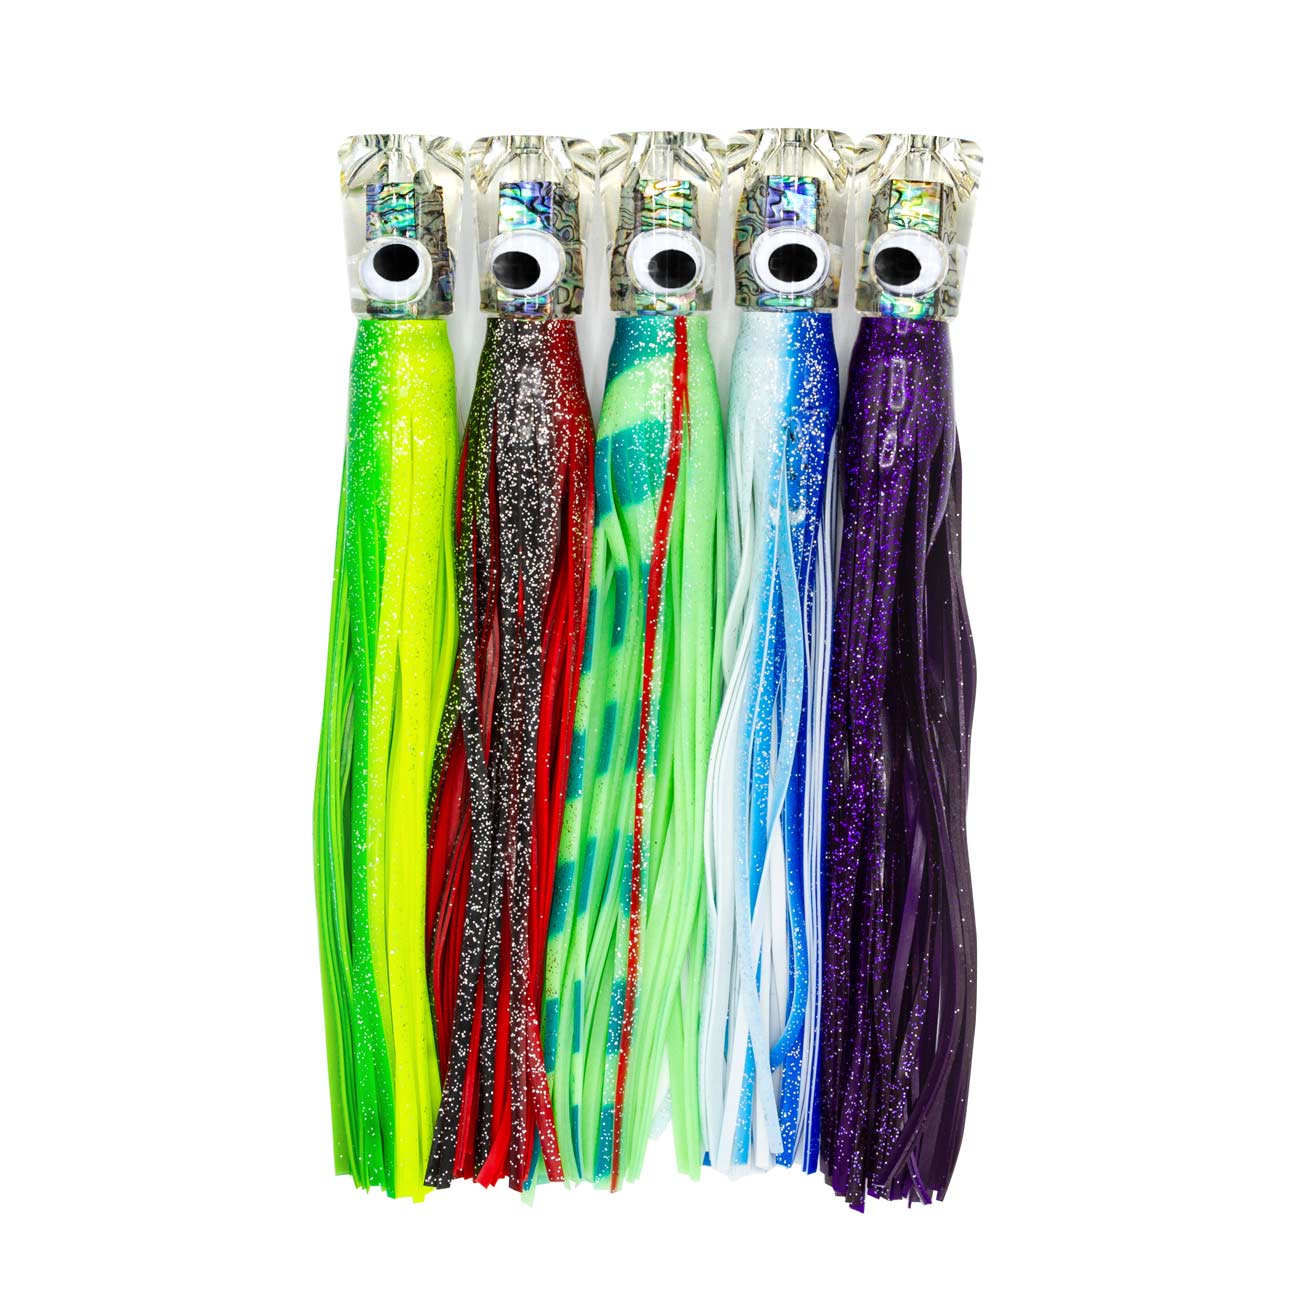 11 Jet Head Trolling Lures Set of Five – Rite Angler